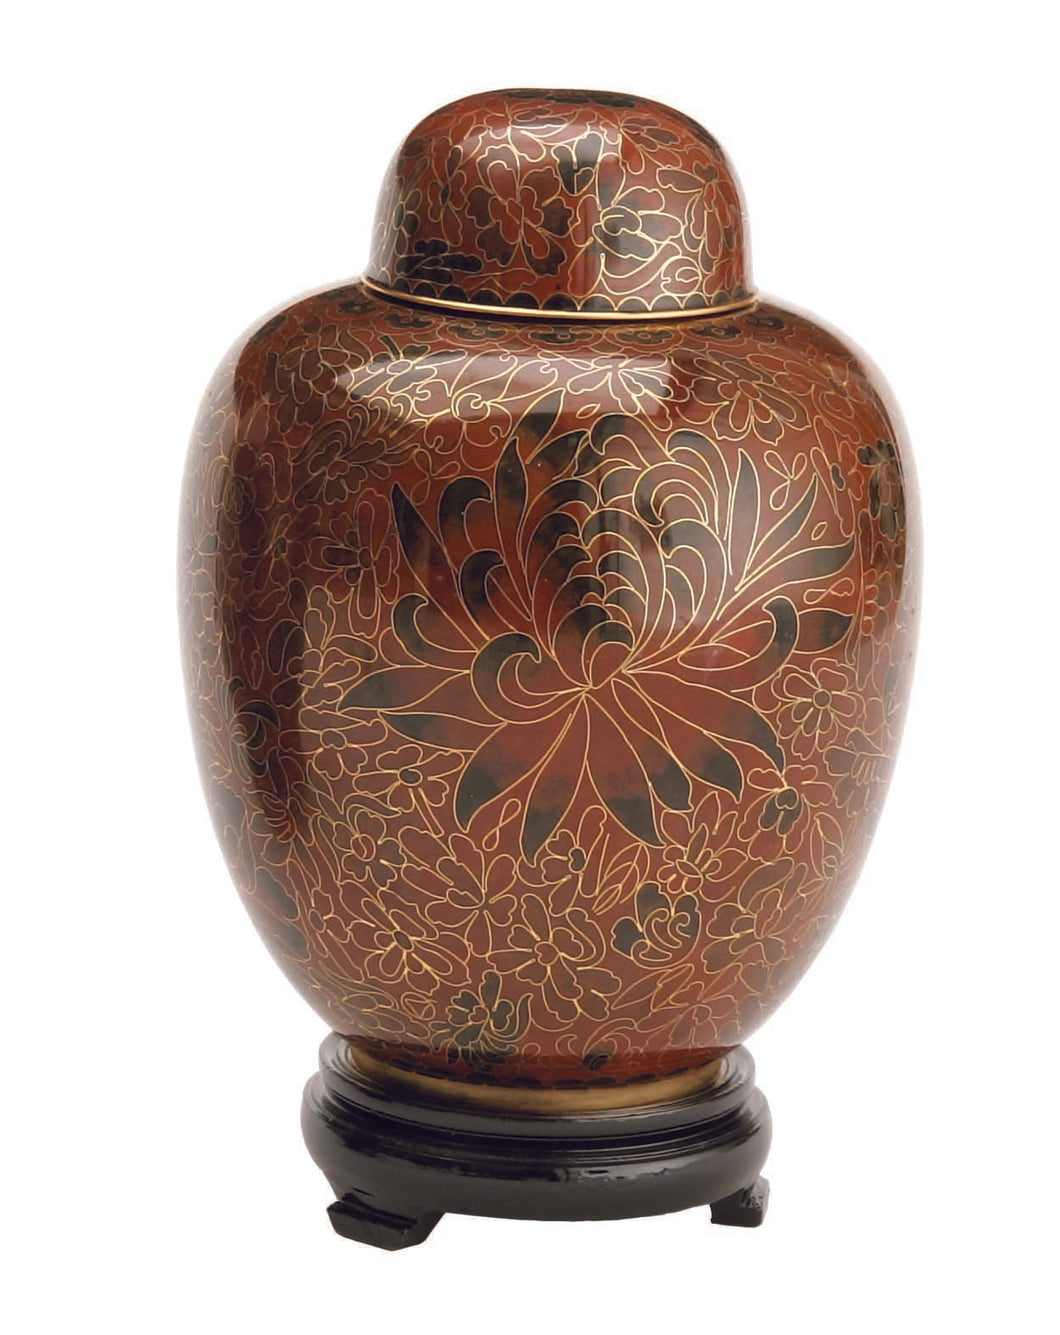 Large/Adult 210 cubic inches Amber Cloisonne Cremation Urn for Ashes w/Flowers